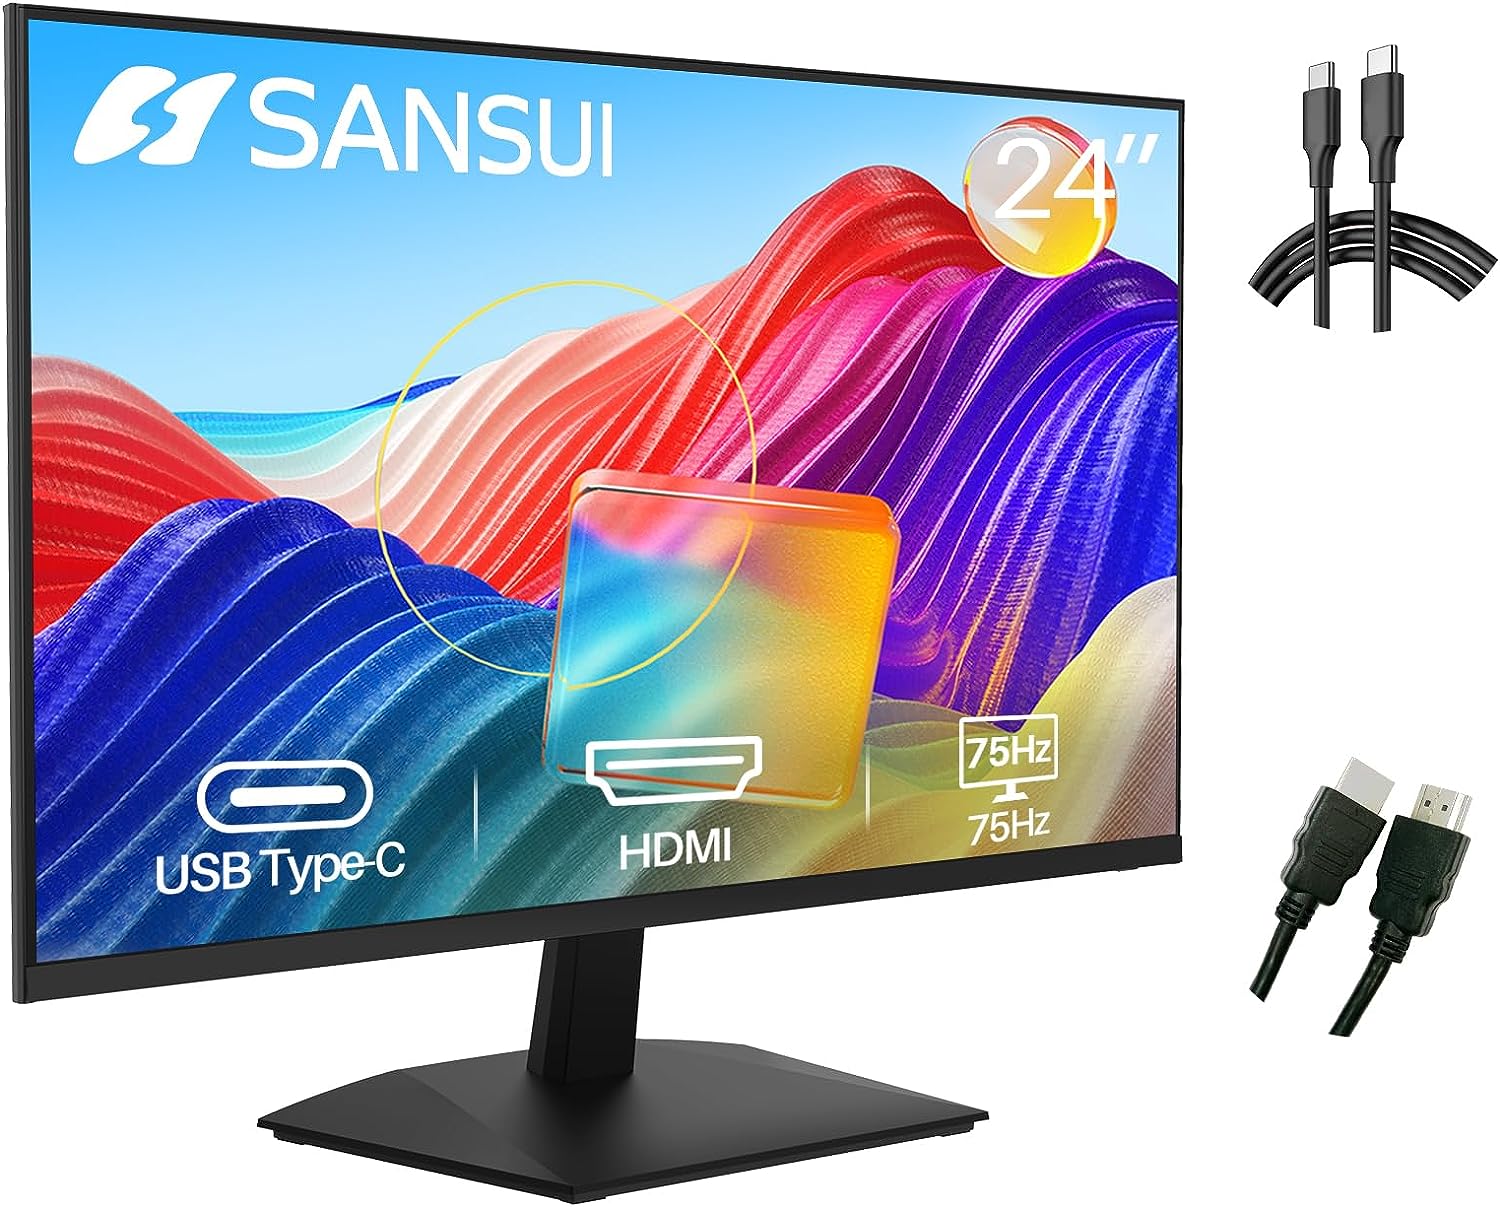 SANSUI Monitor 24 inch FHD PC Monitor with USB Type-C, [...]